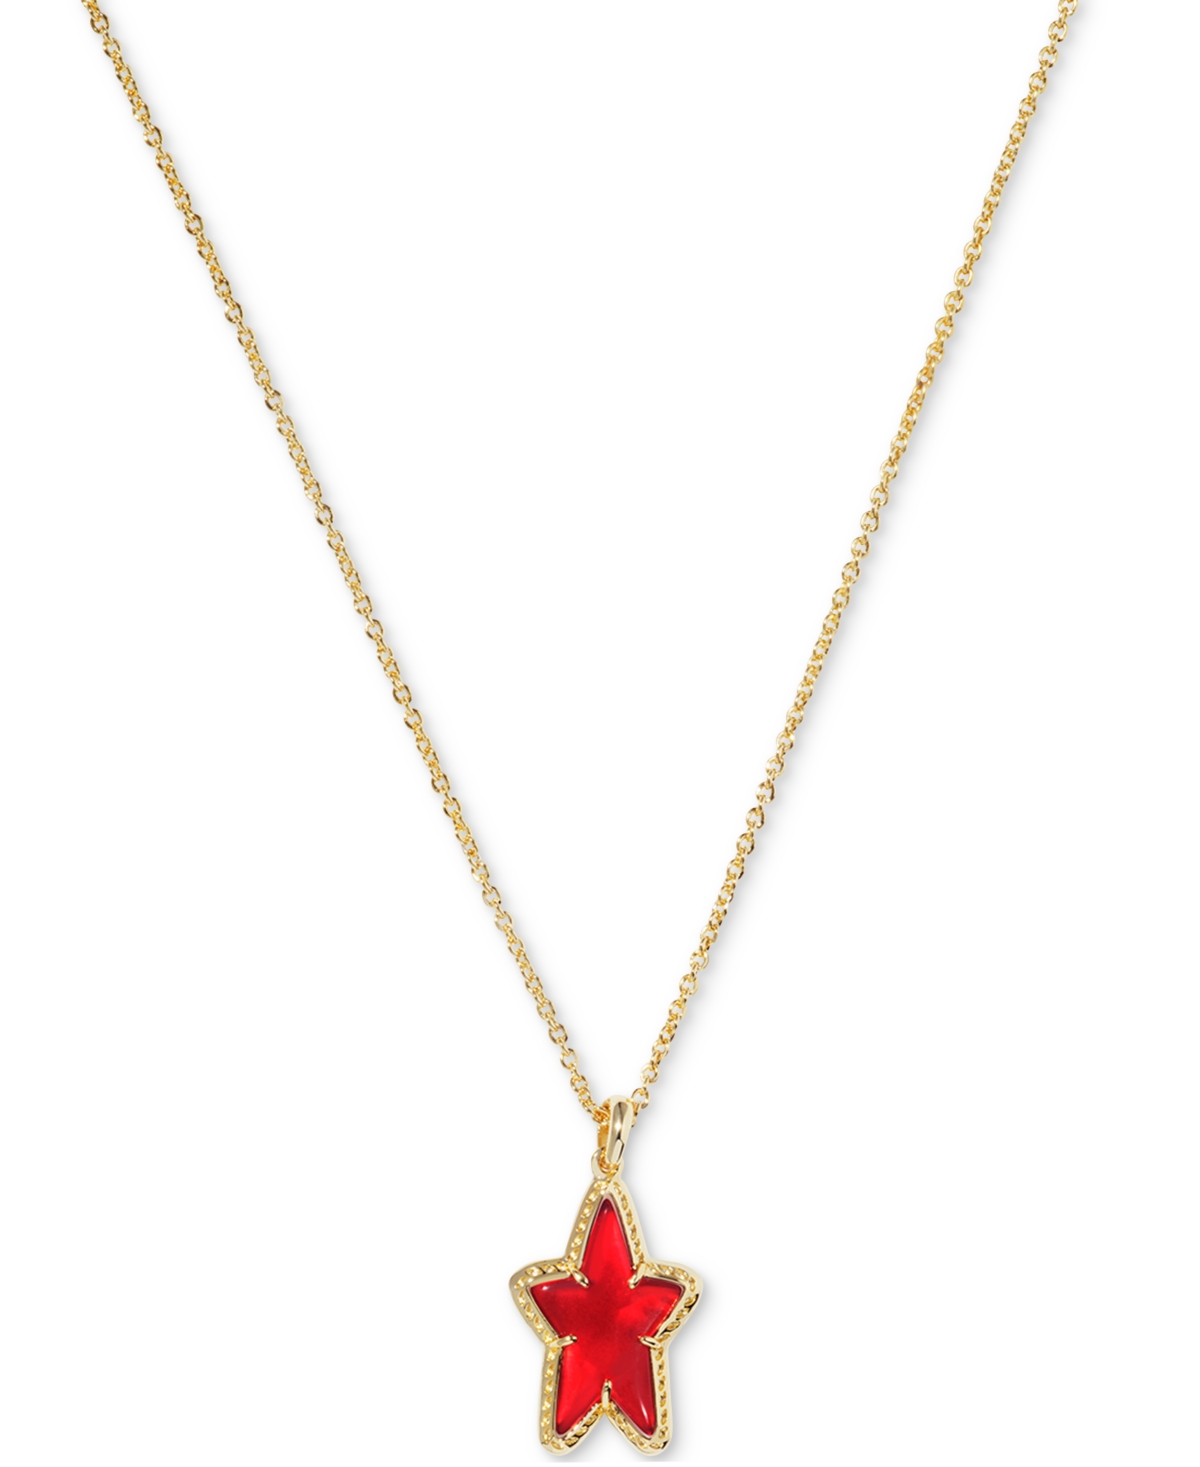 14k Gold-Plated Mother-of-Pearl Star 19" Pendant Necklace - Gld Cobalt